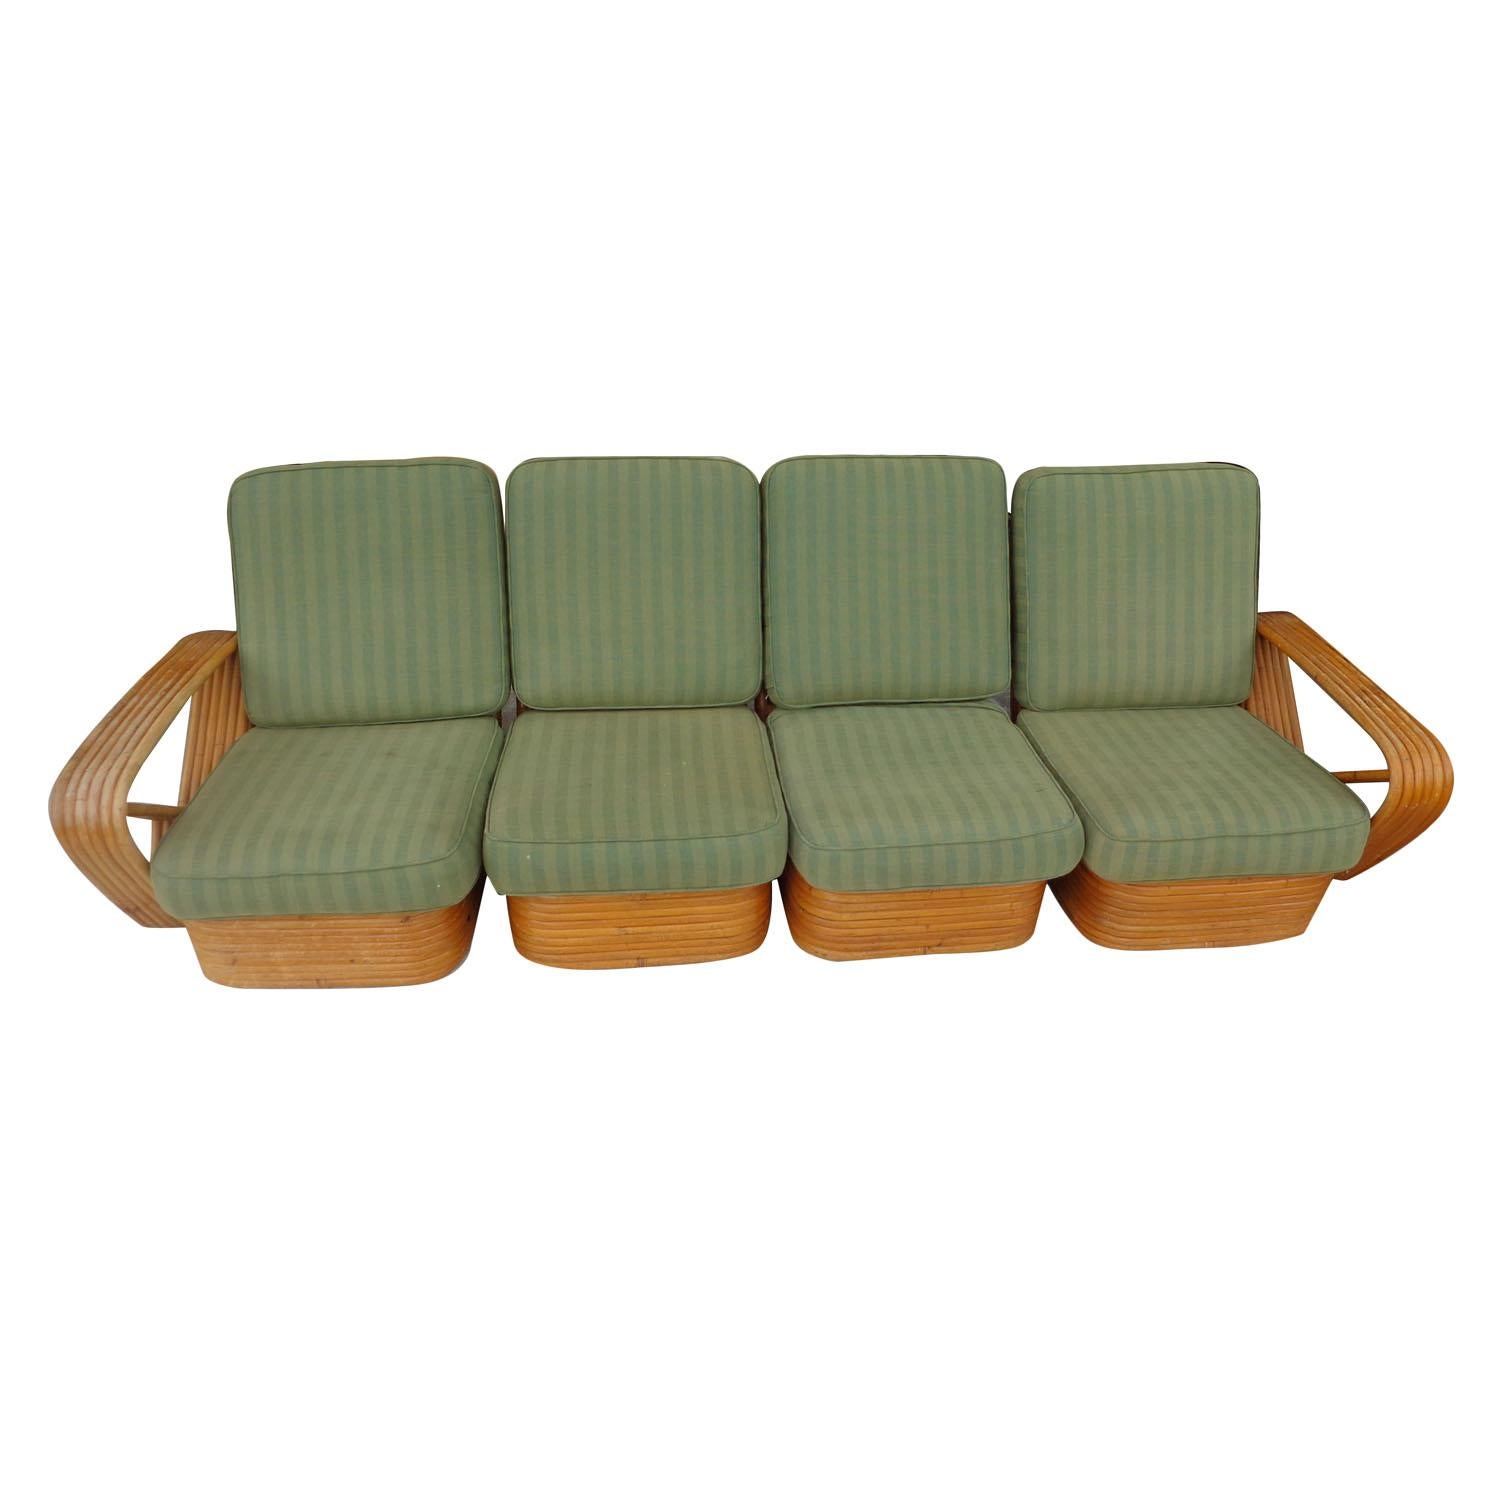 Paul Frankl Pretzel 4-seat rattan bamboo sofa.

Rare 4 seat version this classic design. Pretzel rattan sectional sofa designed by Paul Frankl. This sofa features a stacked rattan base with six strand square pretzel arms and is divided into a four